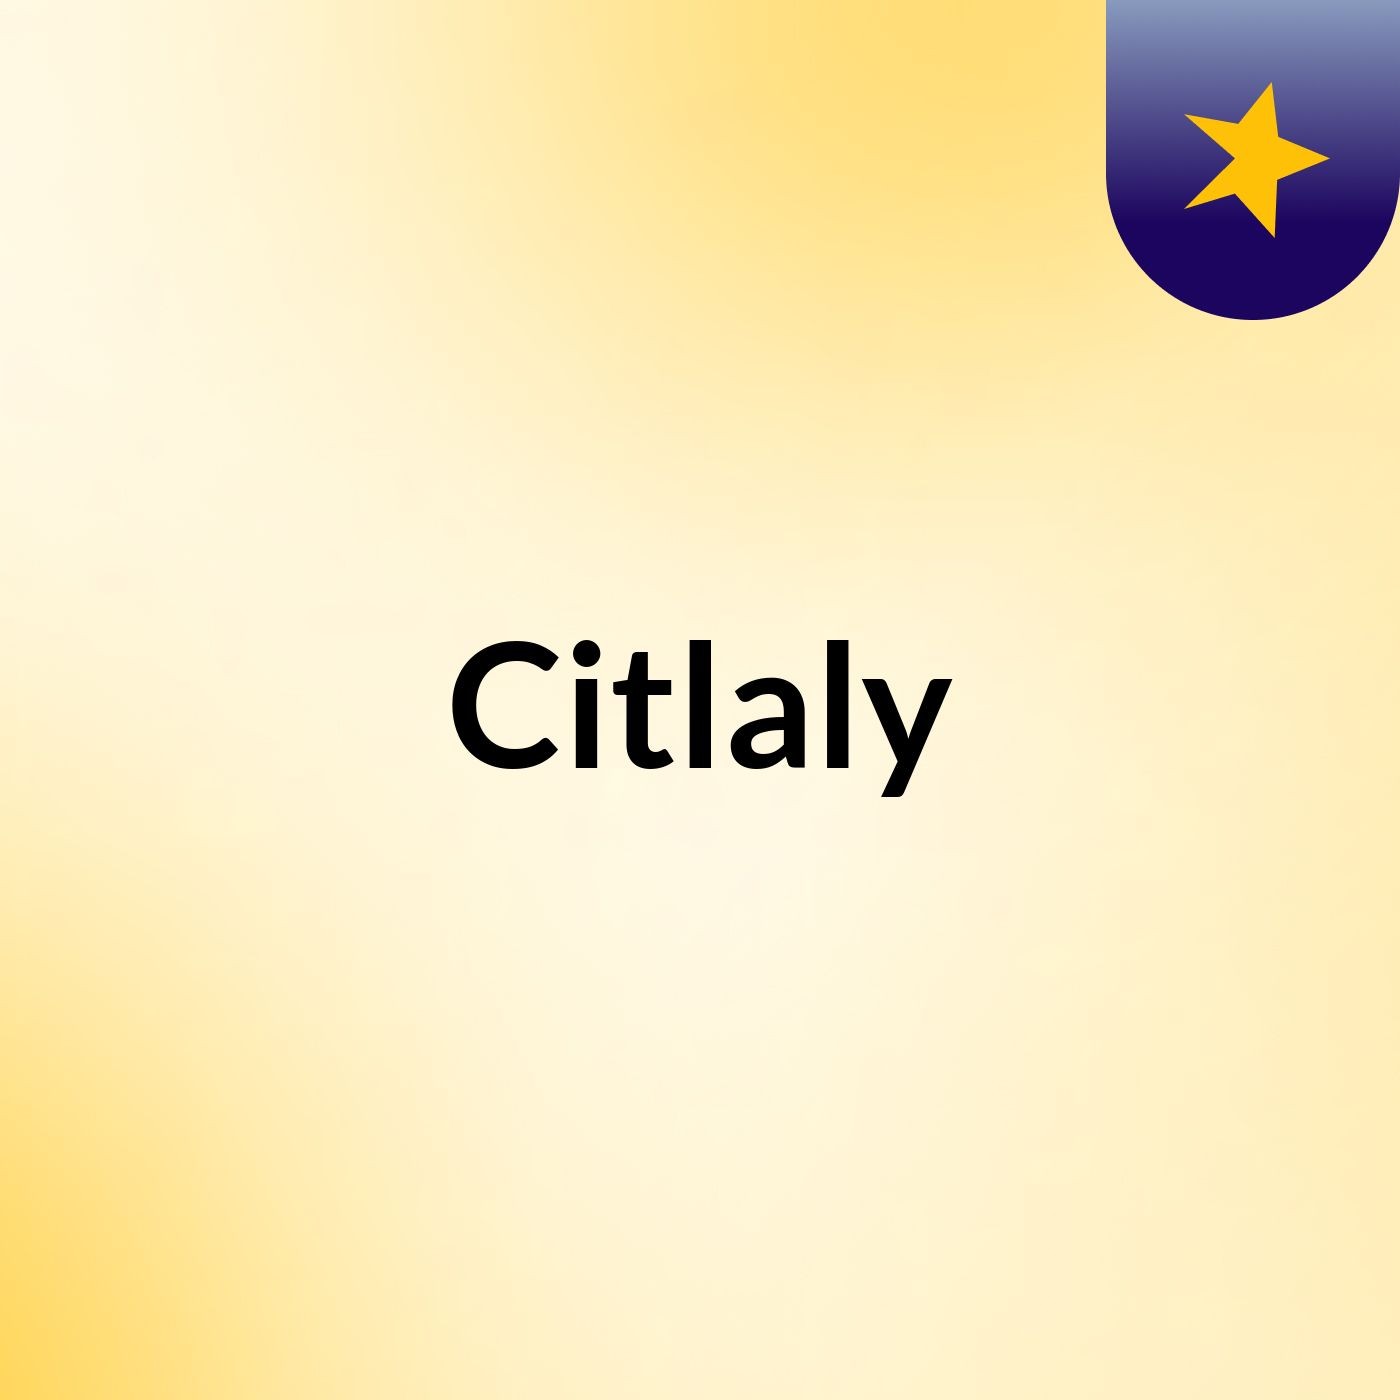 Citlaly